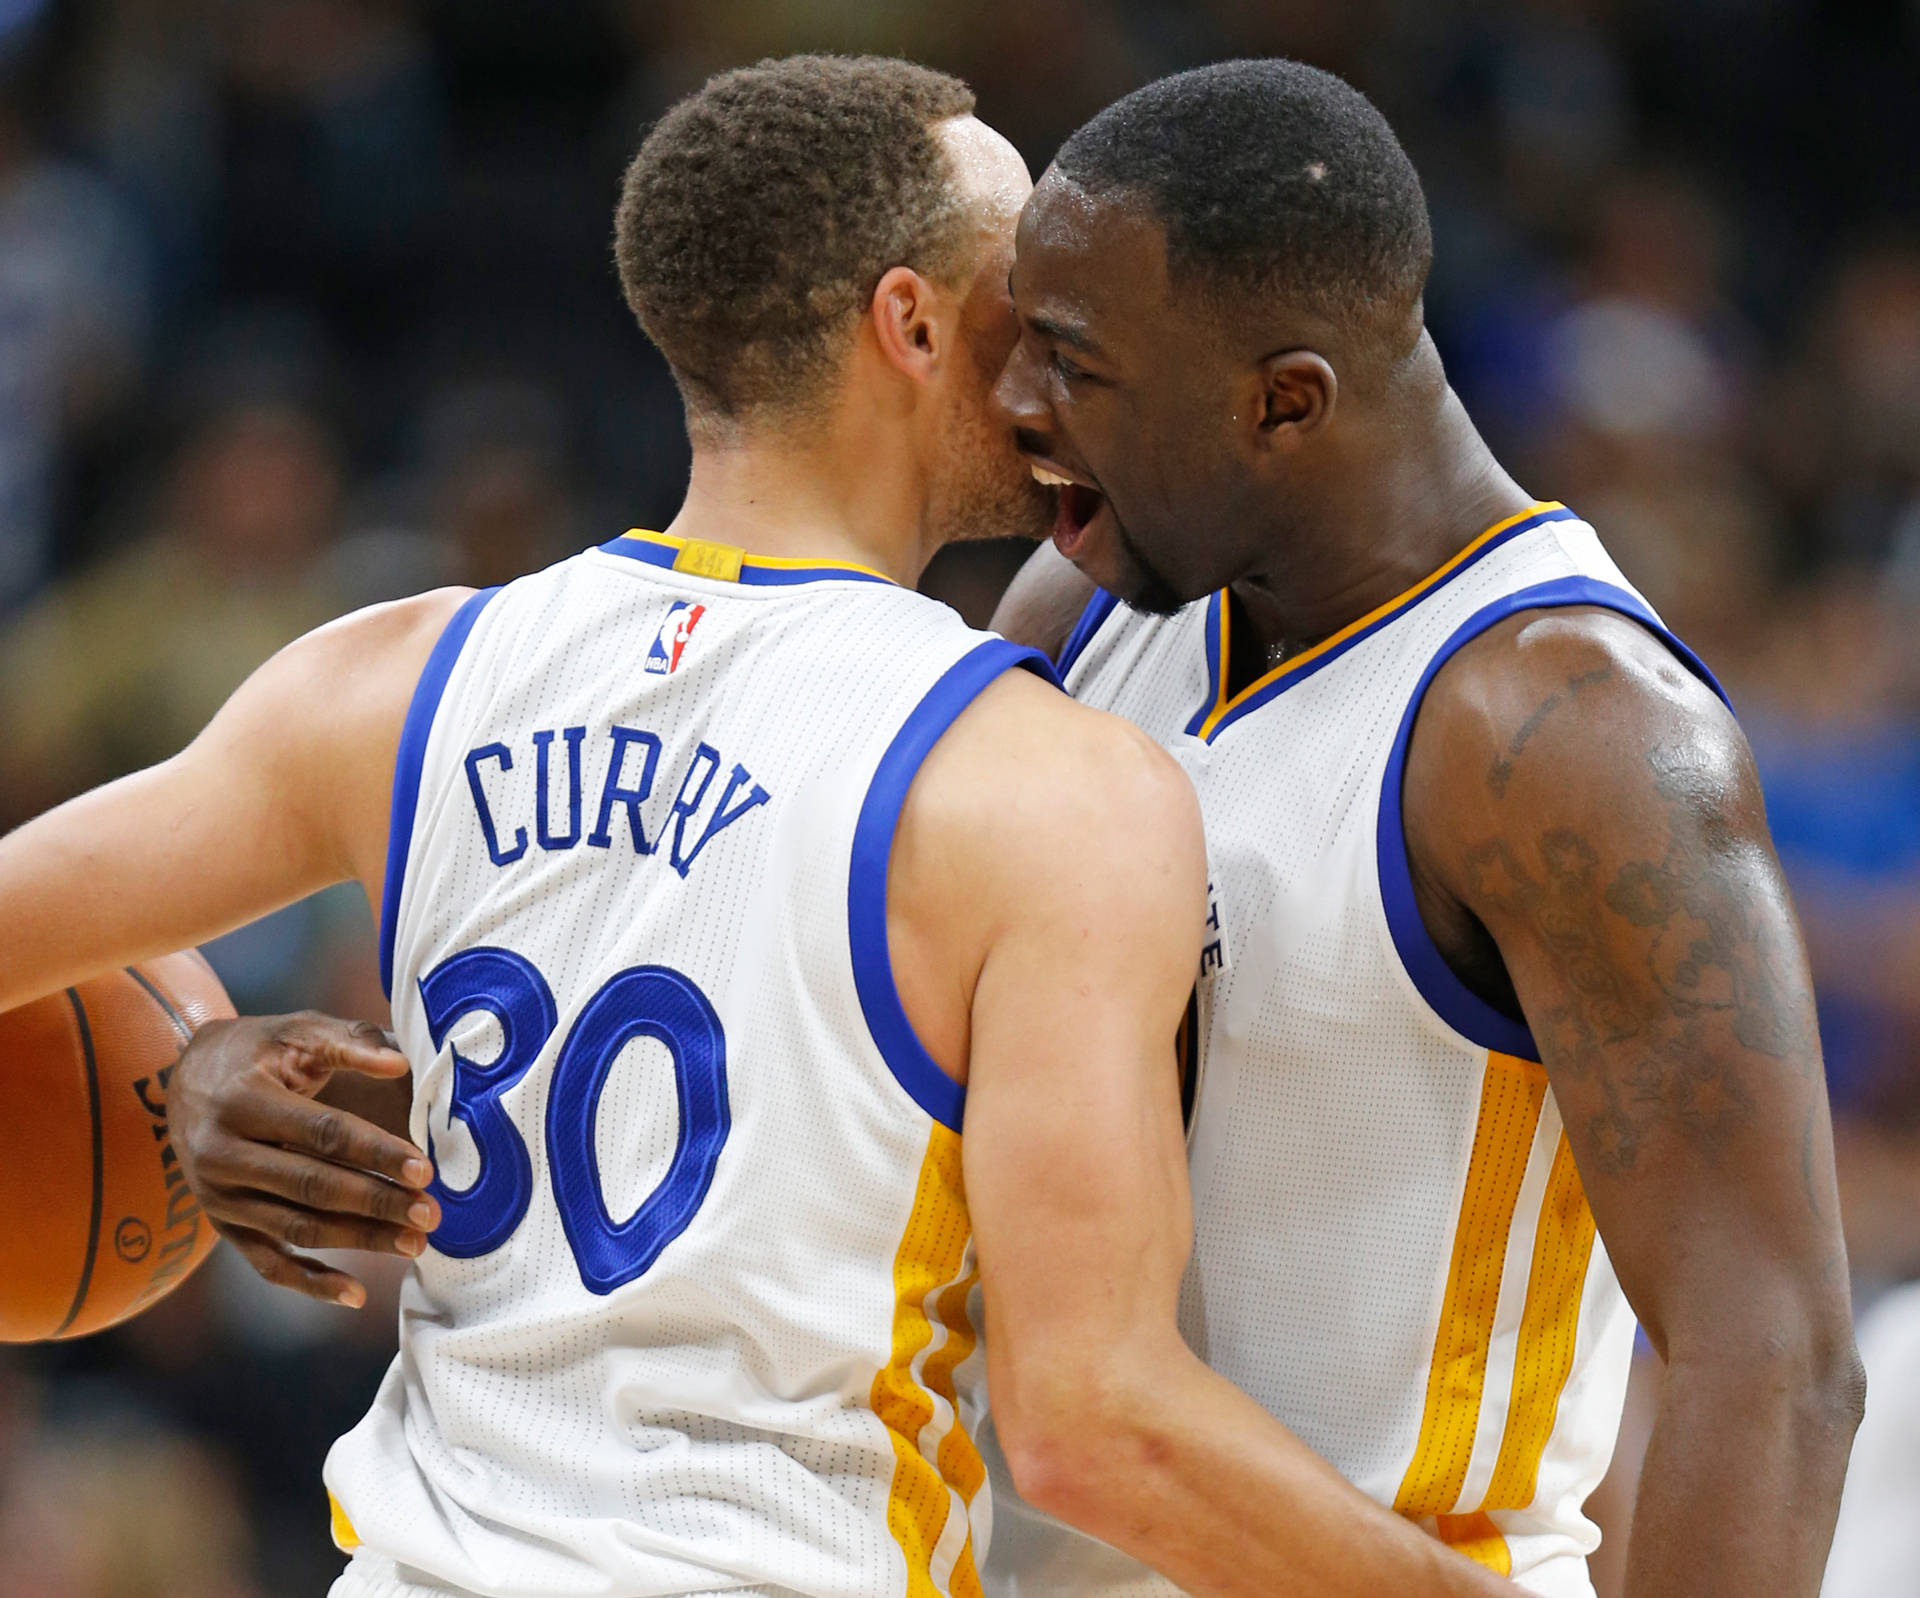 Stephen Curry and Draymond Green celebrate the Warriors 72nd win after beating the Spurs in San Antonio. Ronald Cortes/Getty Images